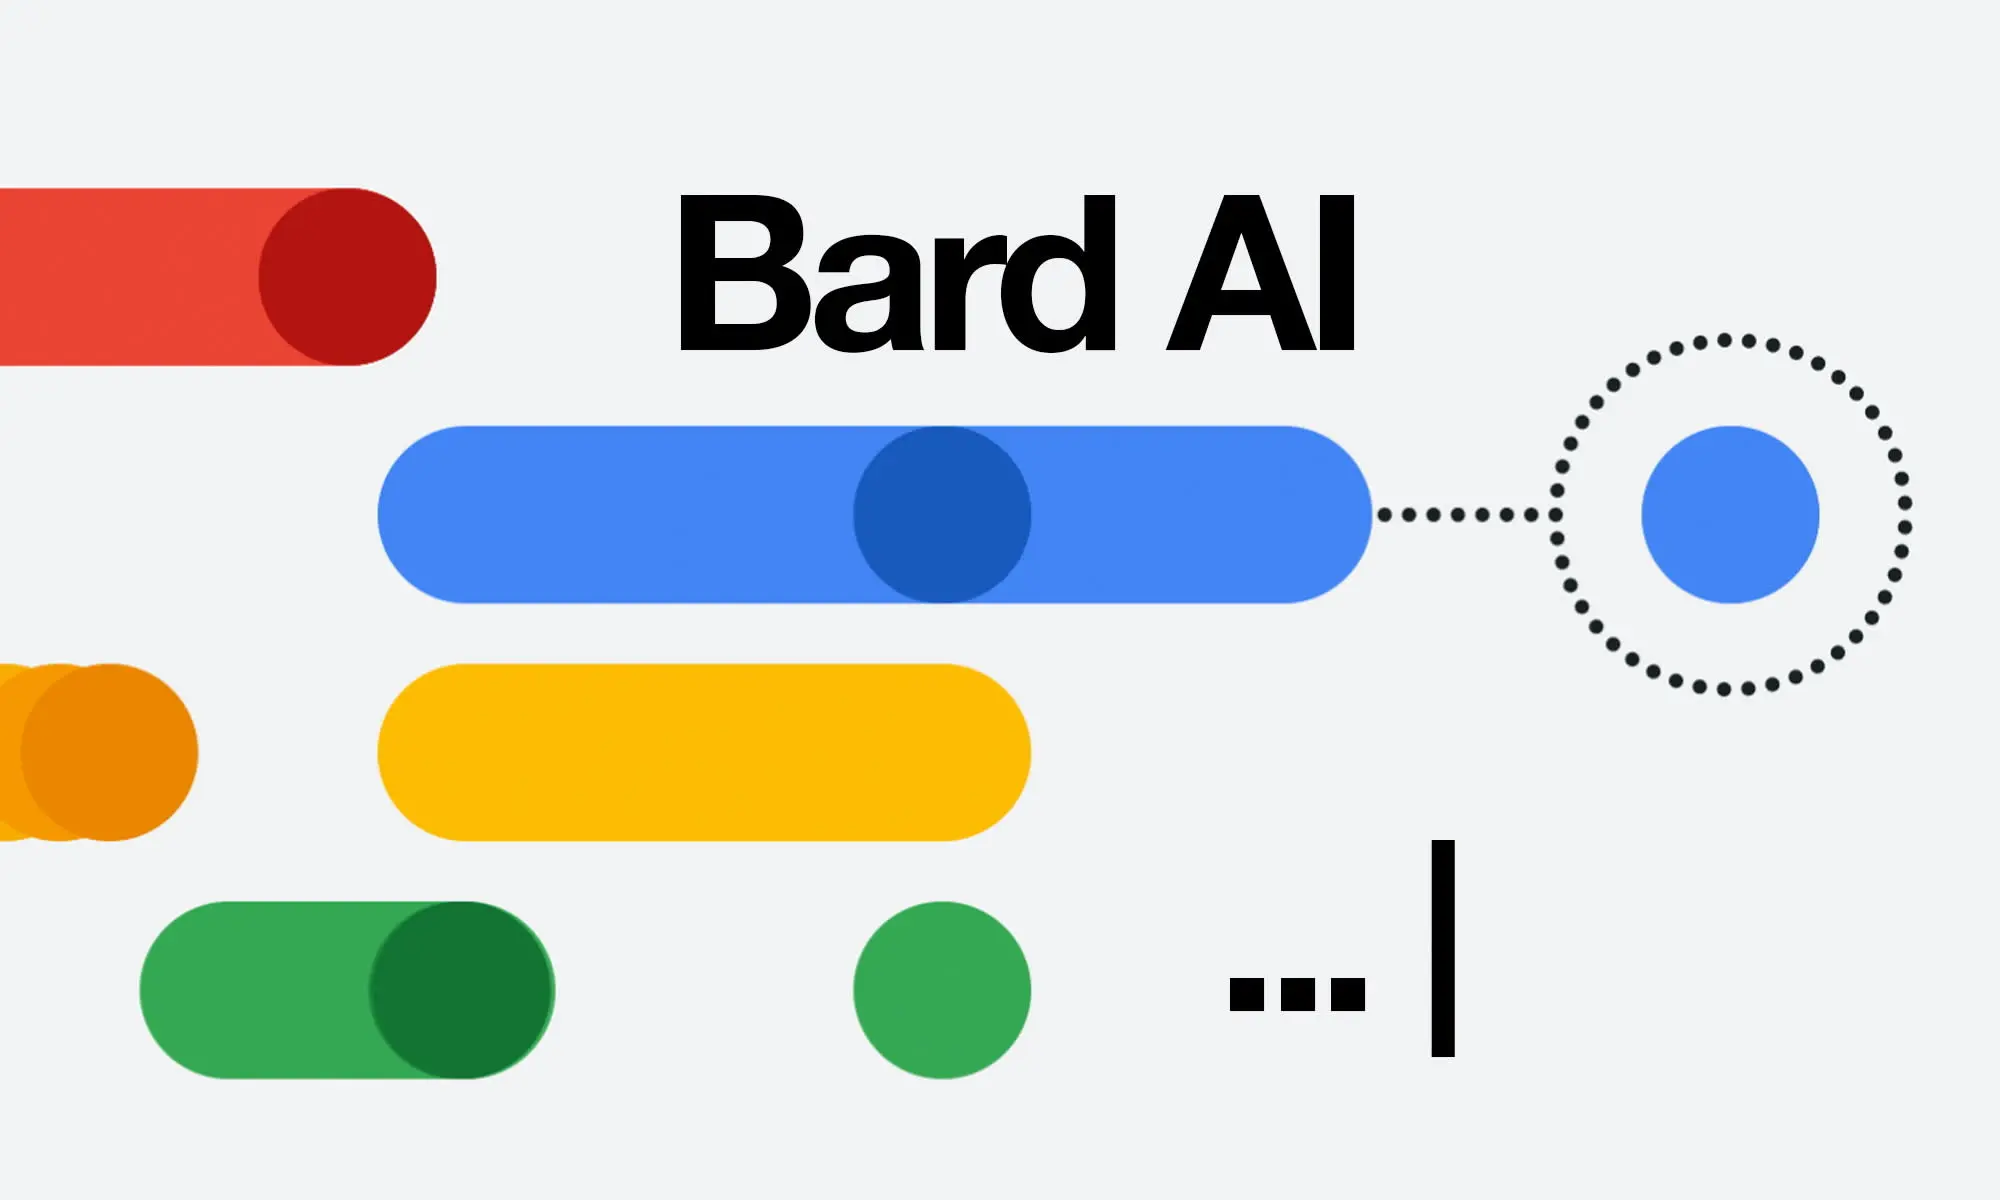 How to get access Google Bard AI